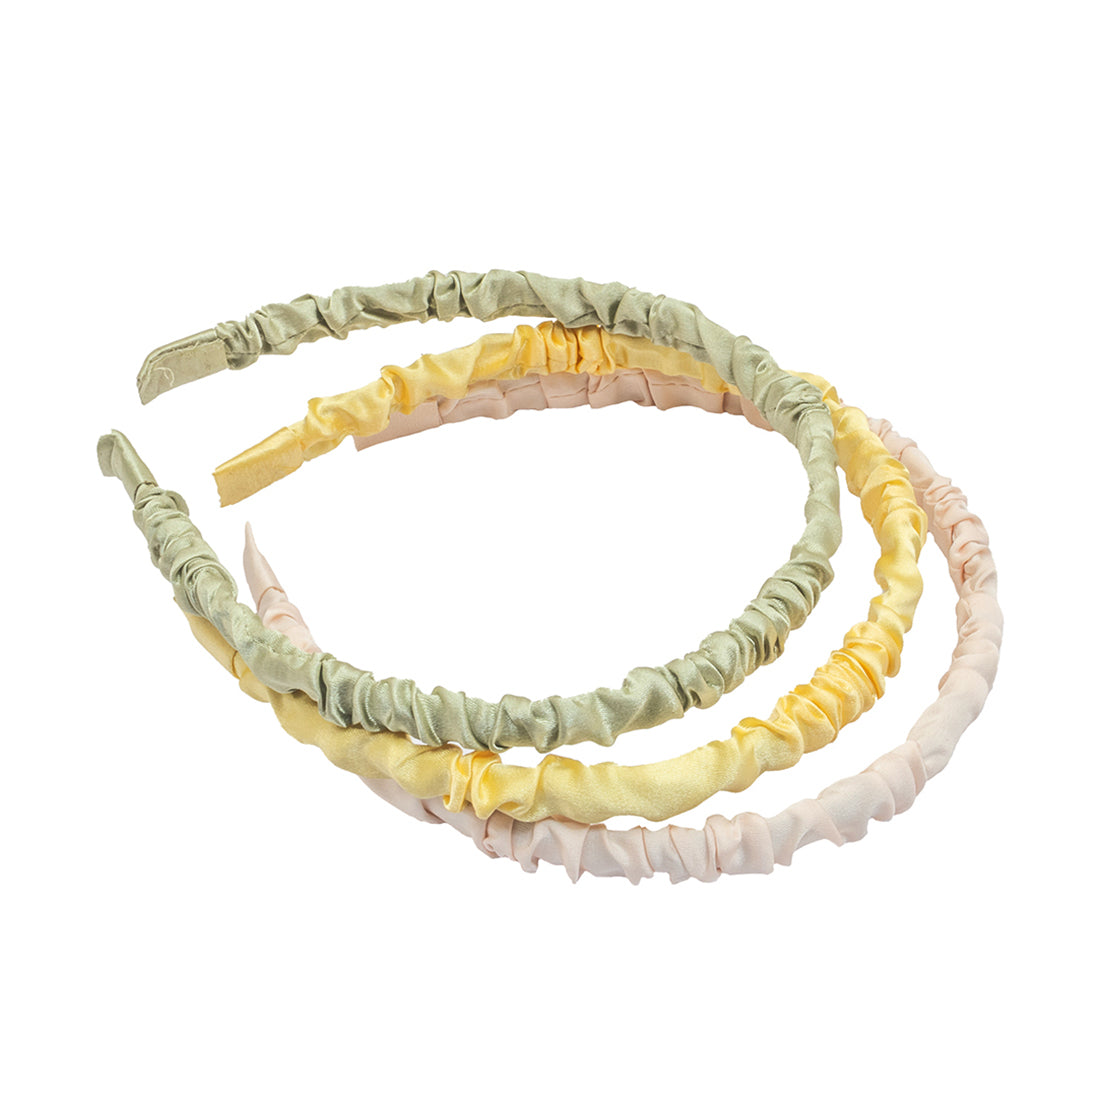 Set of 3 Pastel Green, Yellow & Pink Scrunched Satin Hair Bands